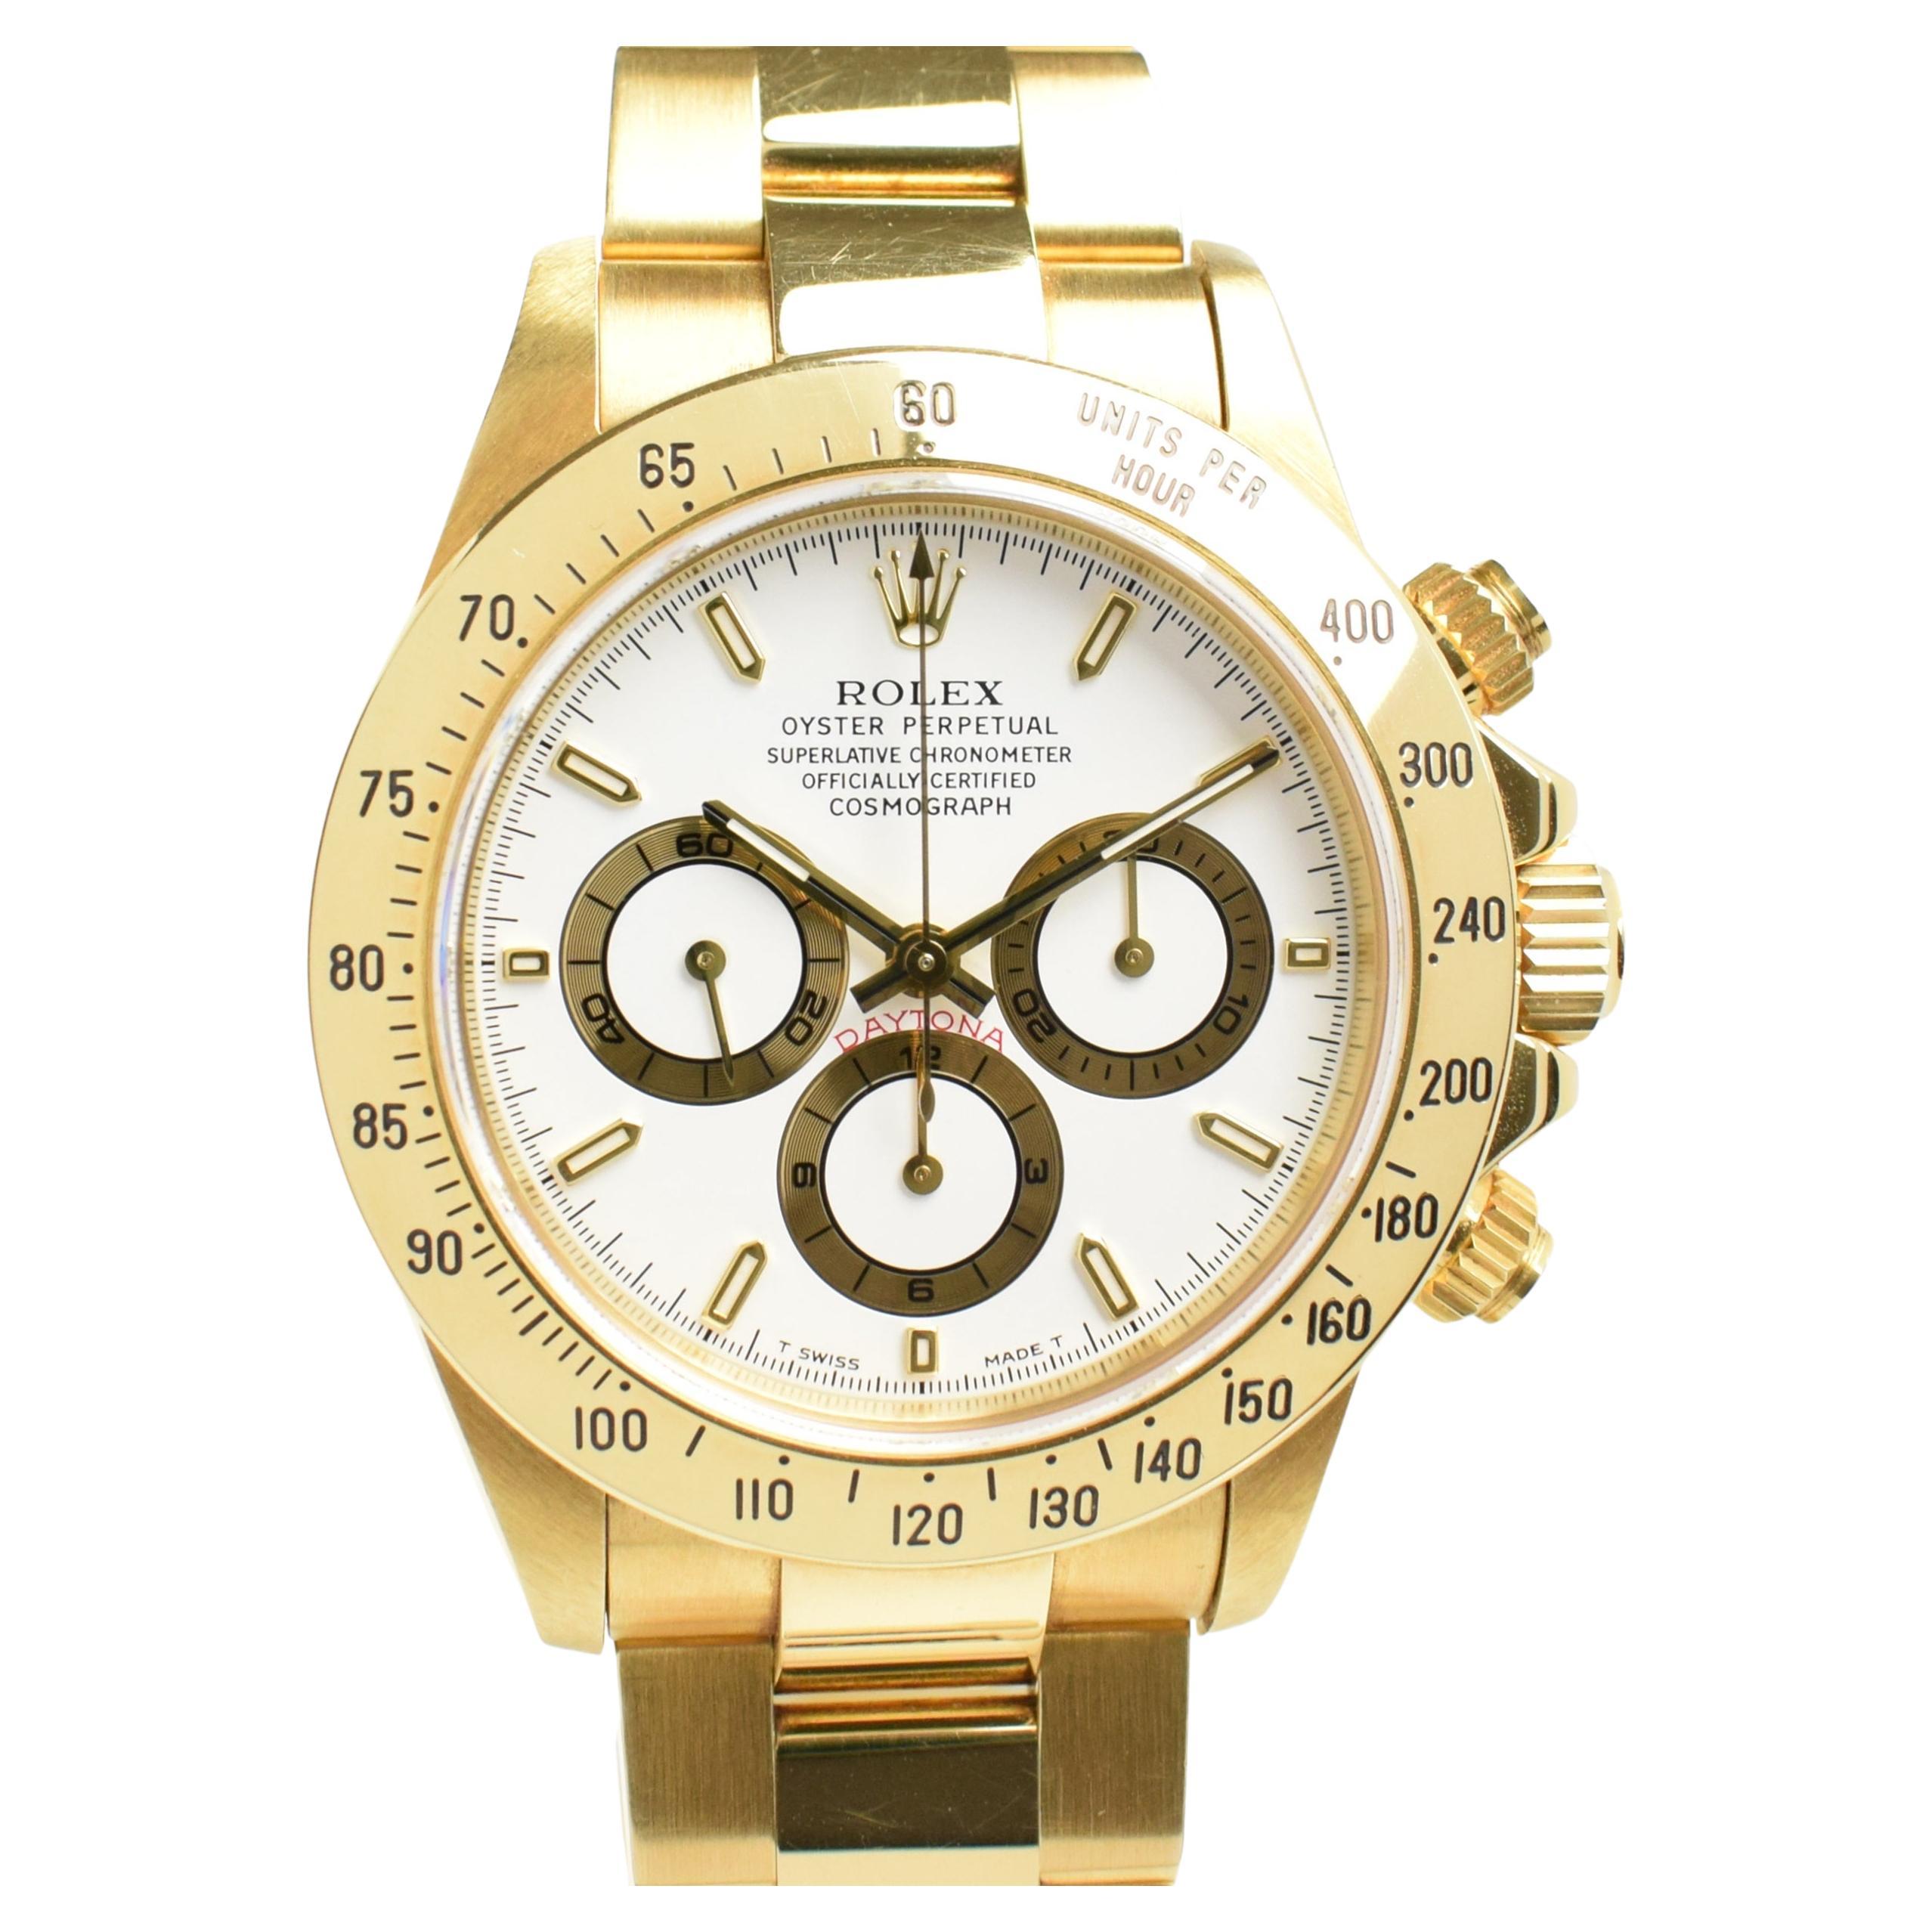 Rolex Daytona 18K Yellow Gold White Dial 16528 Cosmograph Chronograph Watch 1997 For Sale